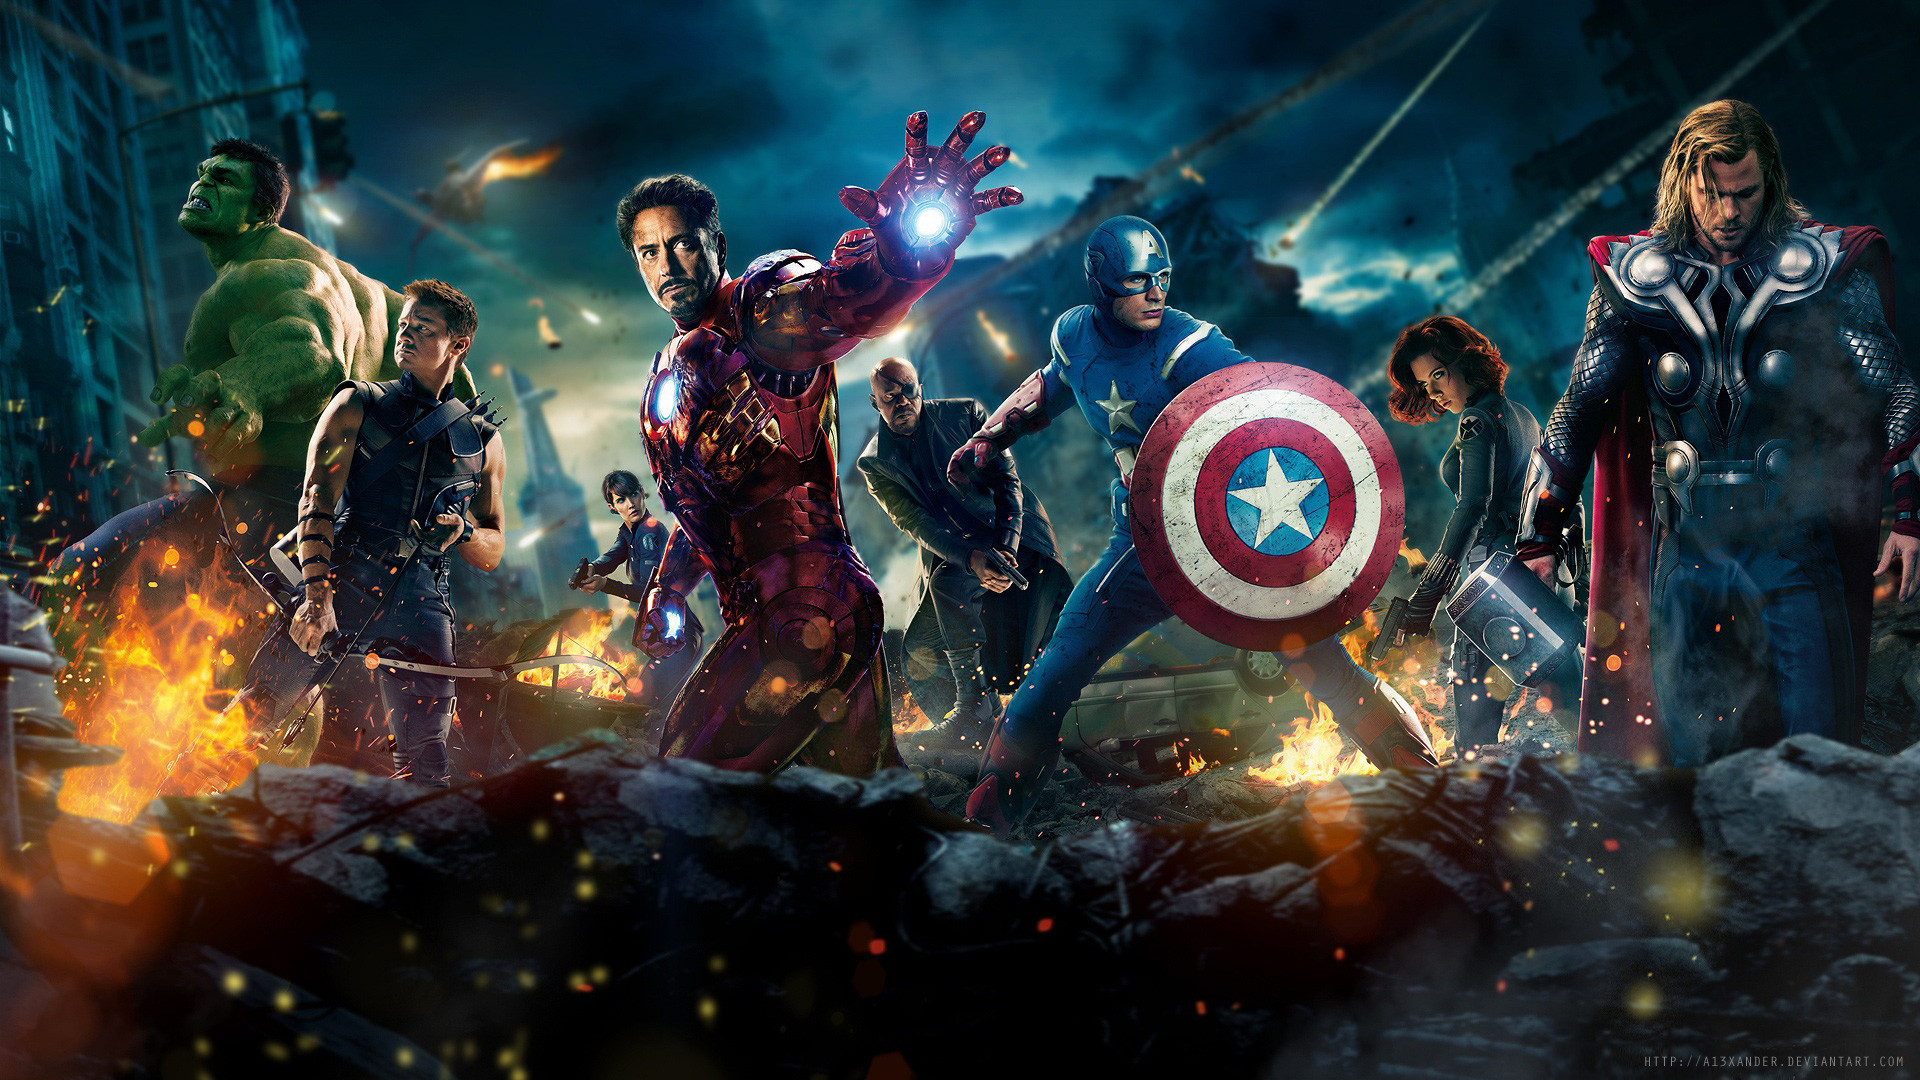 61+ 2018 Avengers Laptop Wallpapers: HD, 4K, 5K for PC and Mobile |  Download free images for iPhone, Android